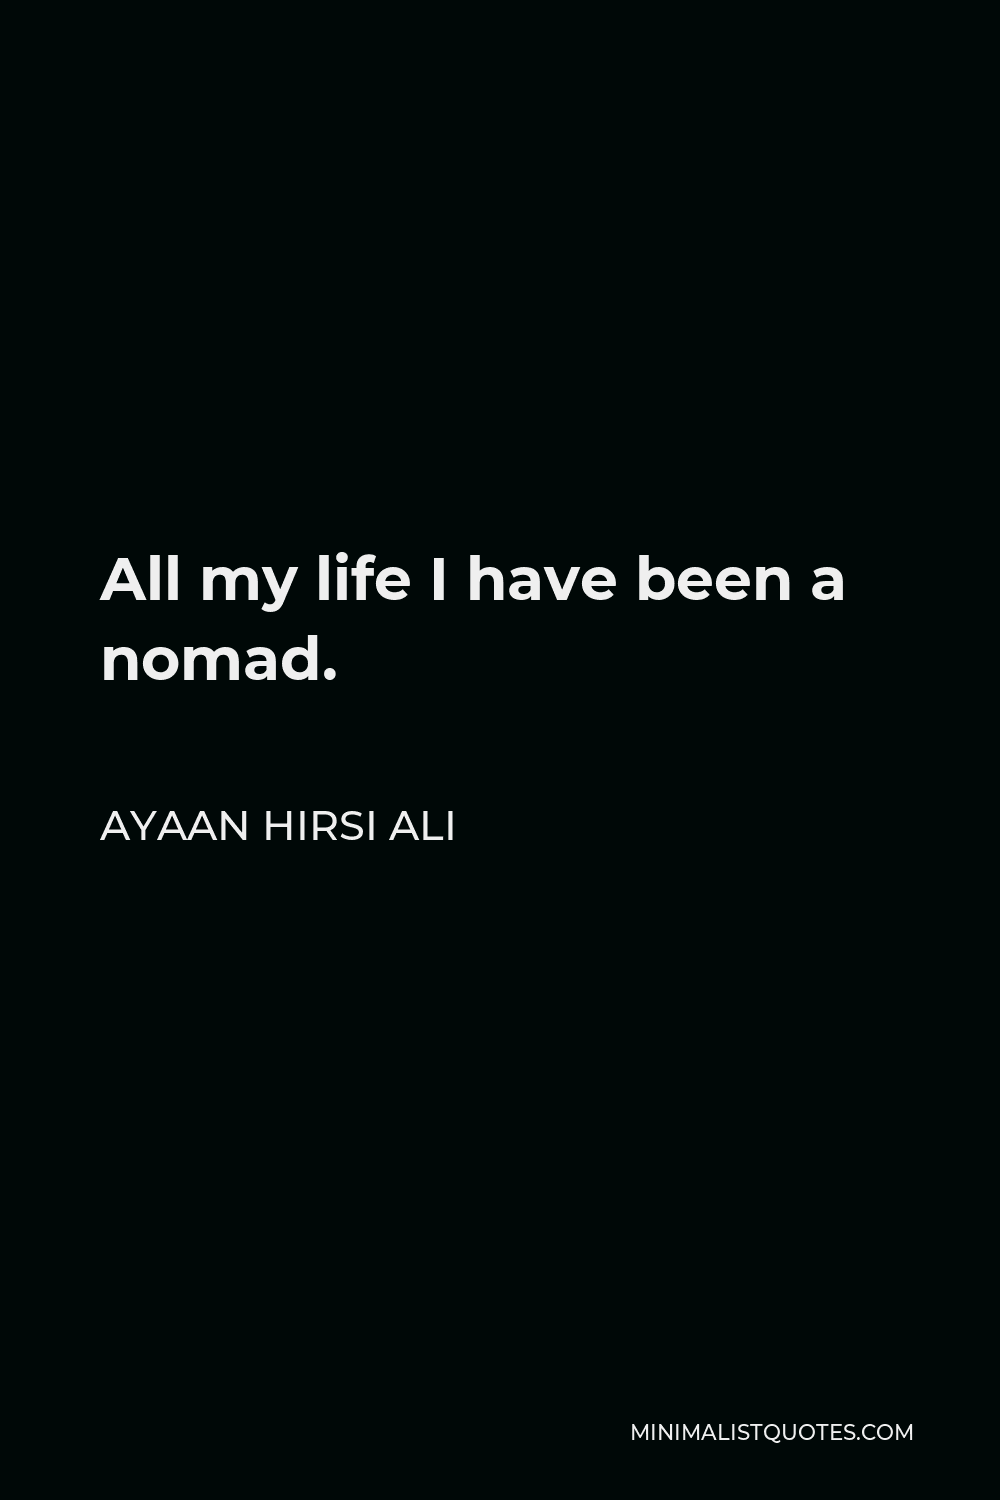 Ayaan Hirsi Ali Quote - All my life I have been a nomad.